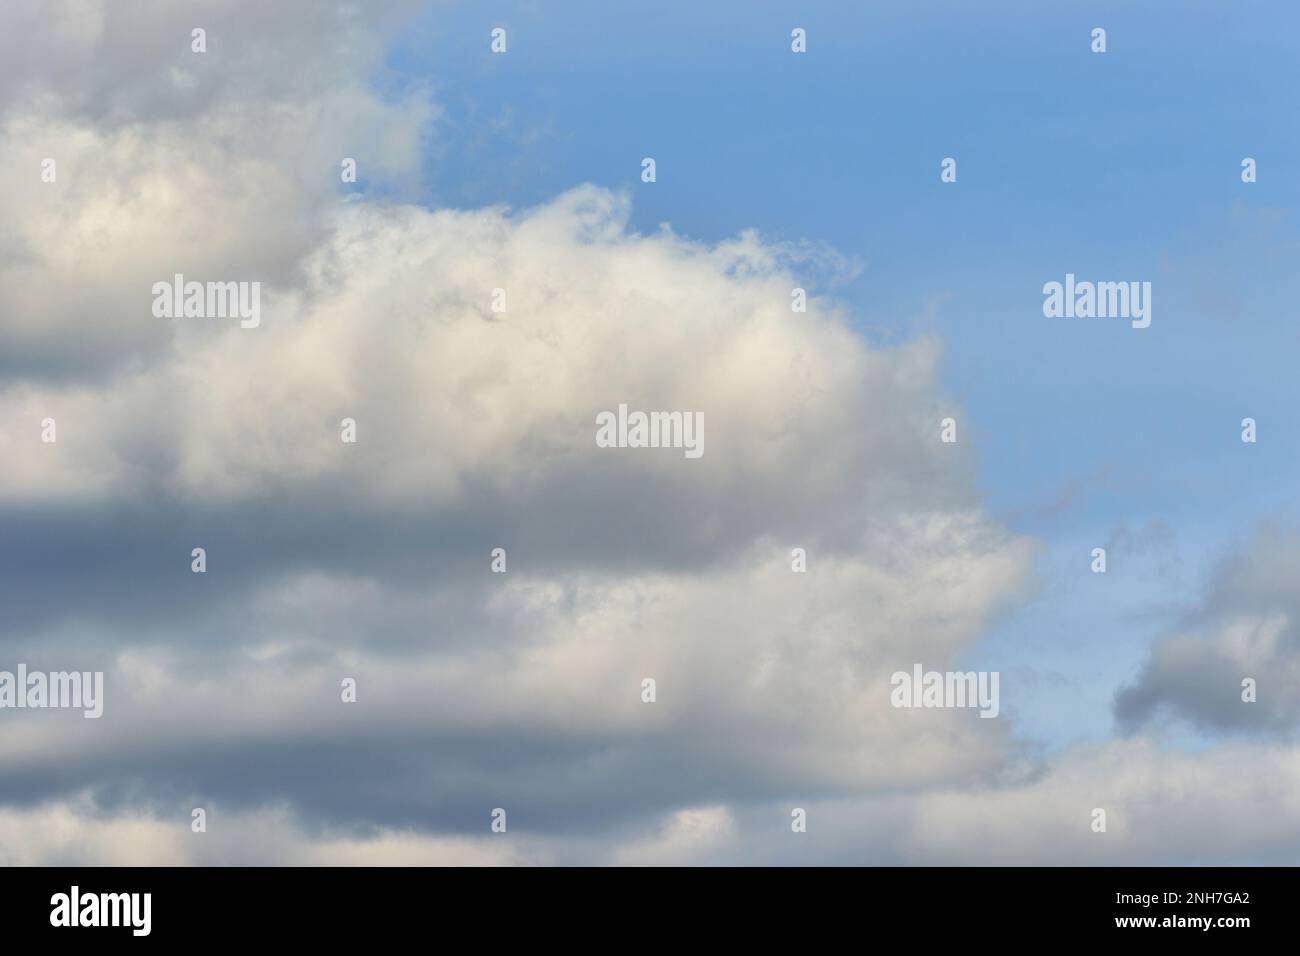 Image natural phenomenon clouds on the sky Stock Photo